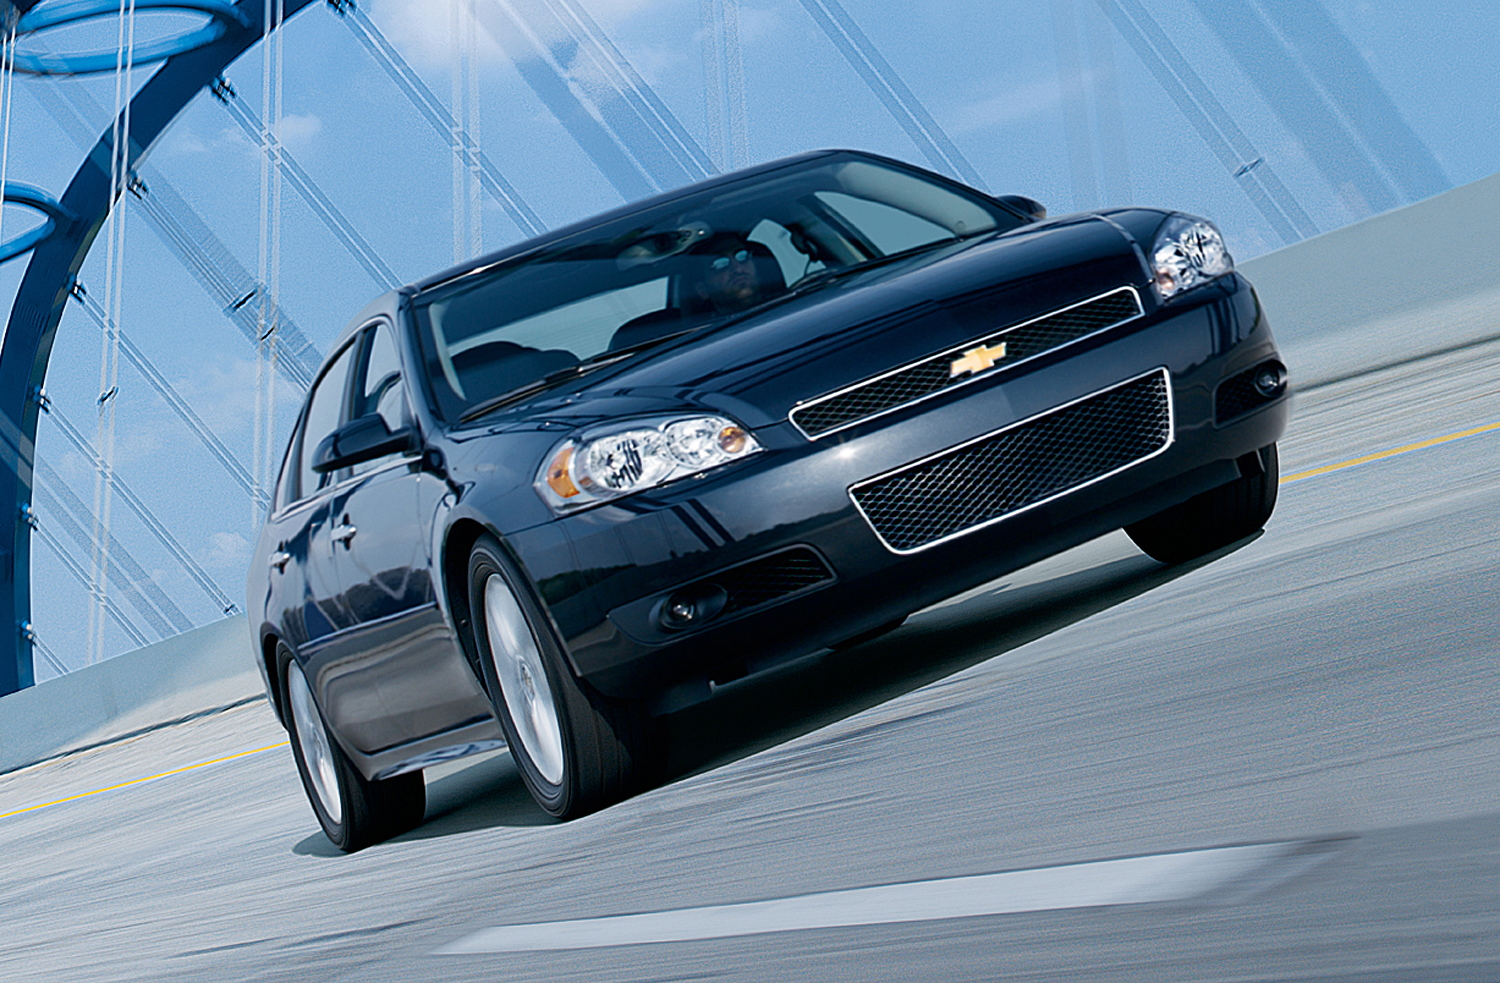 2013 Chevrolet Impala prices and expert review - The Car Connection